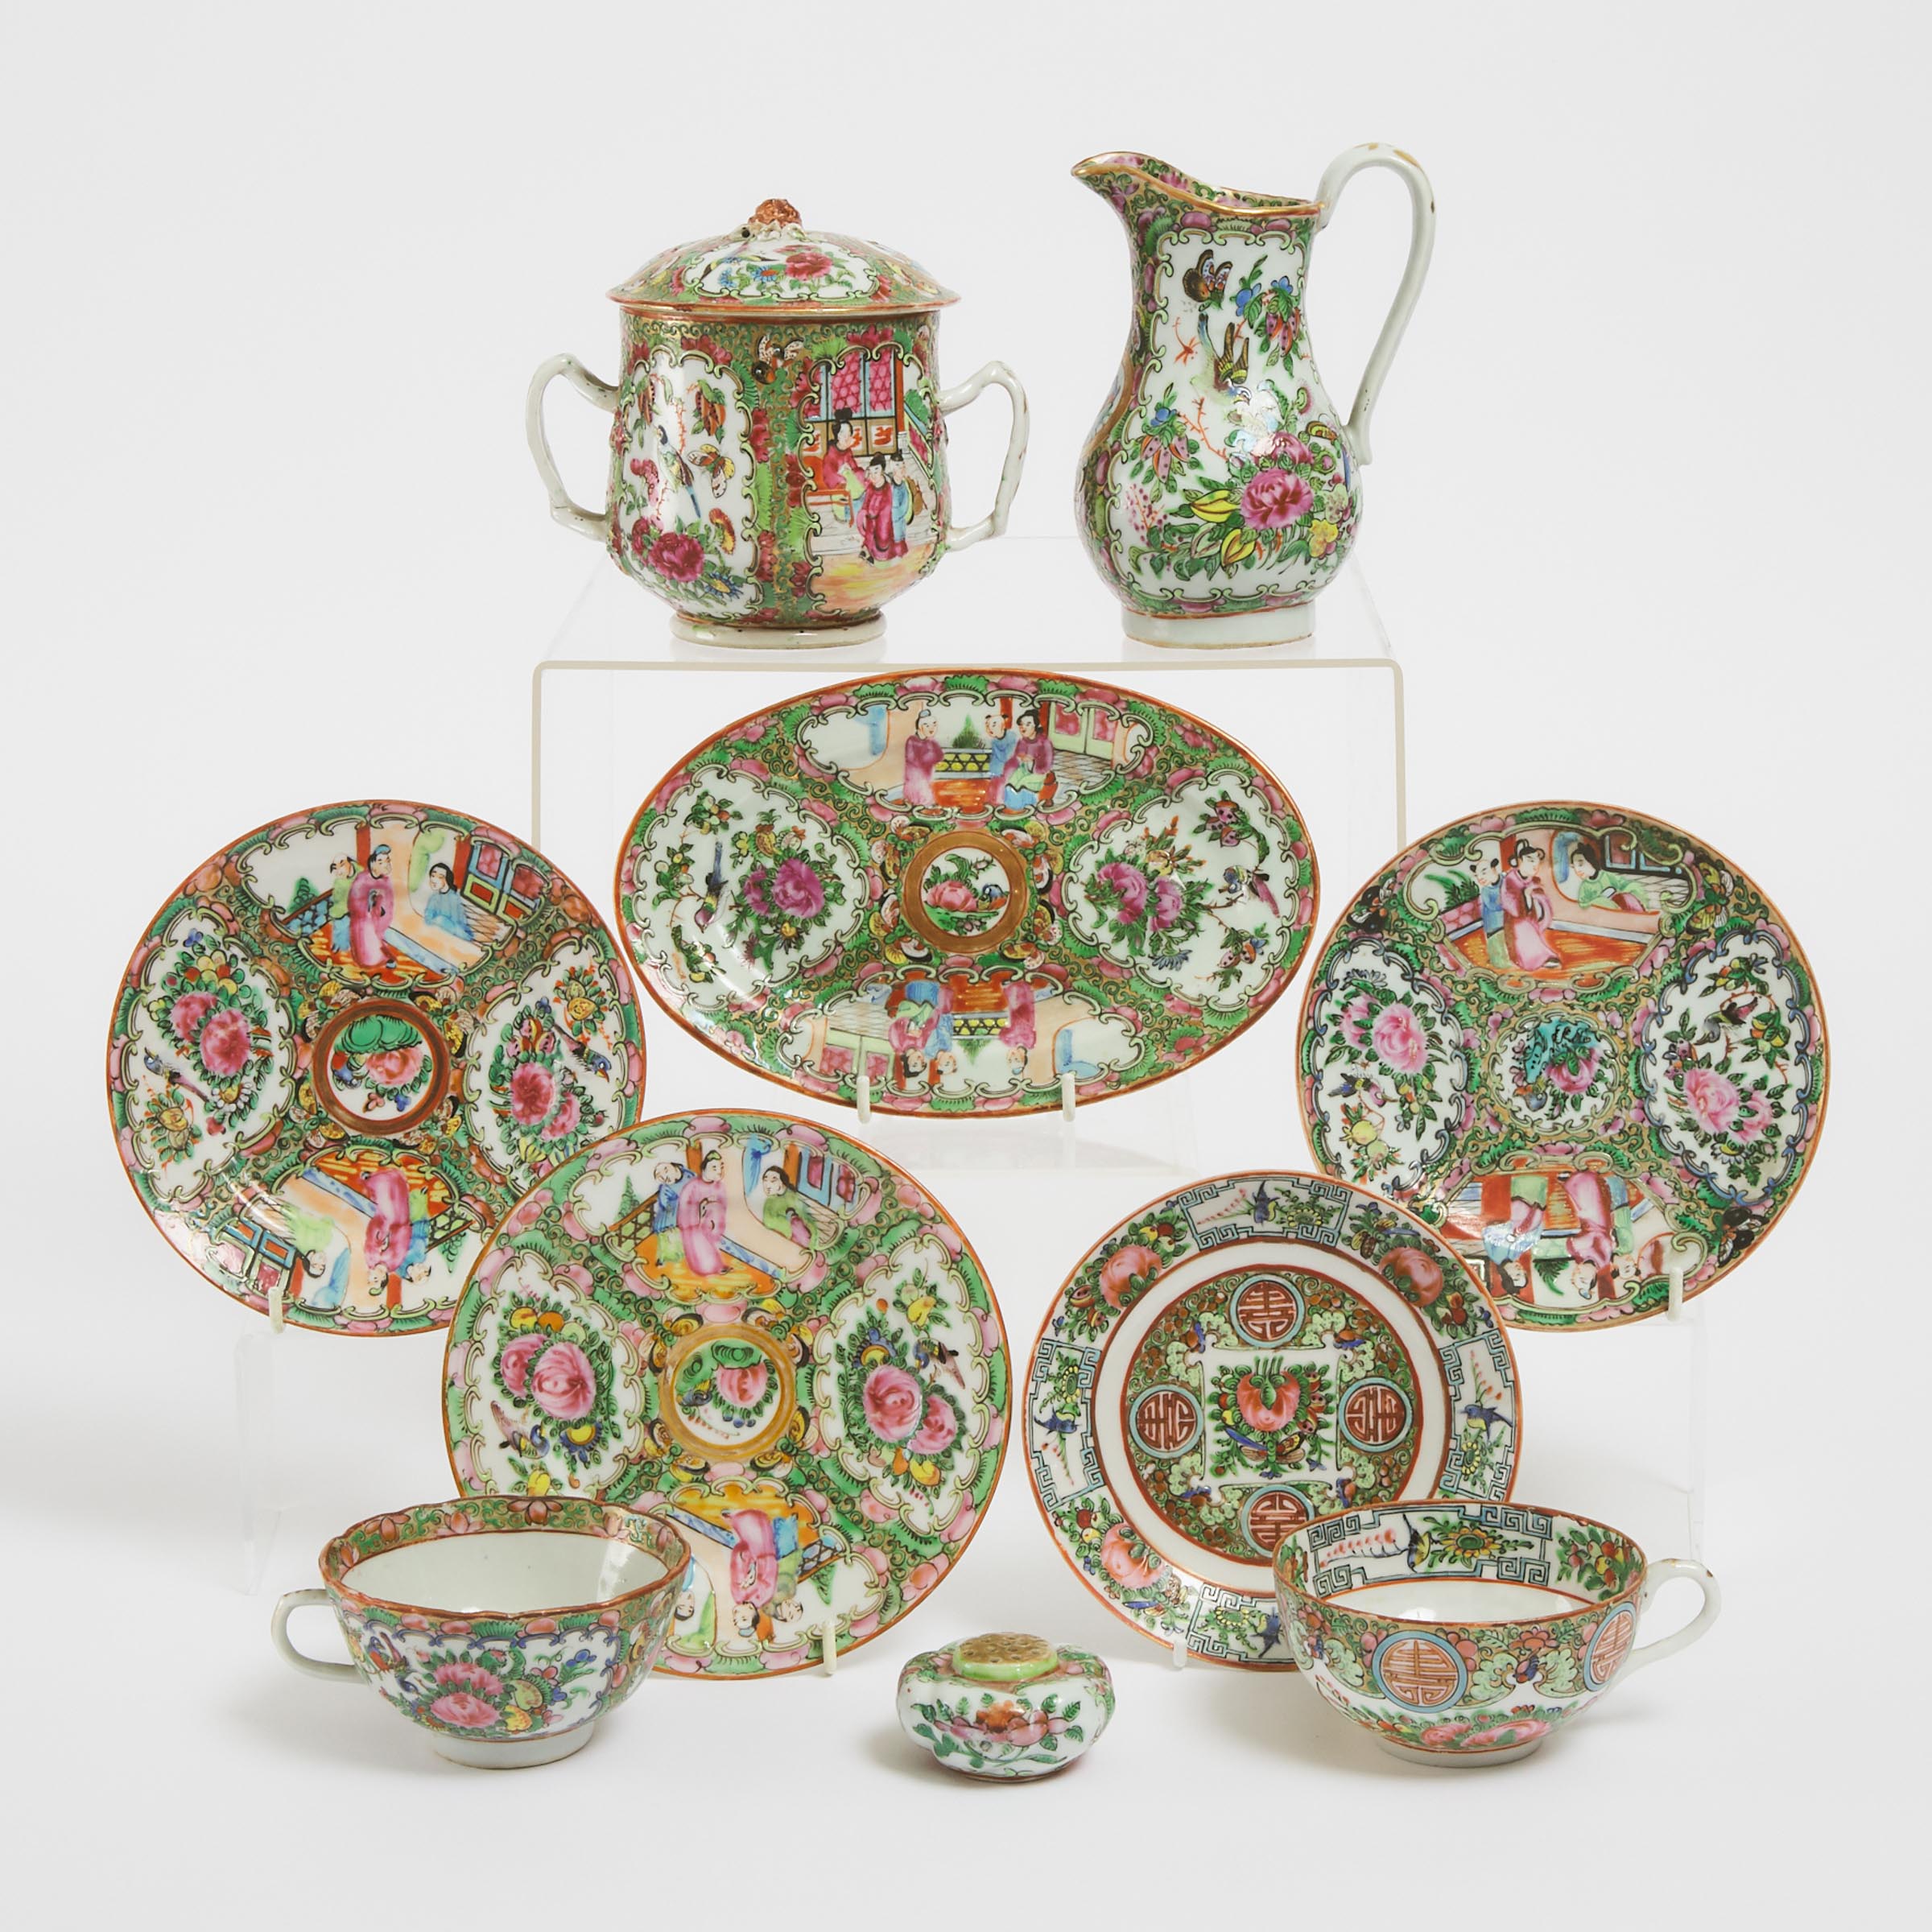 A Group of Ten Chinese Export Canton Famille Rose Tea Wares, 19th Century and Later